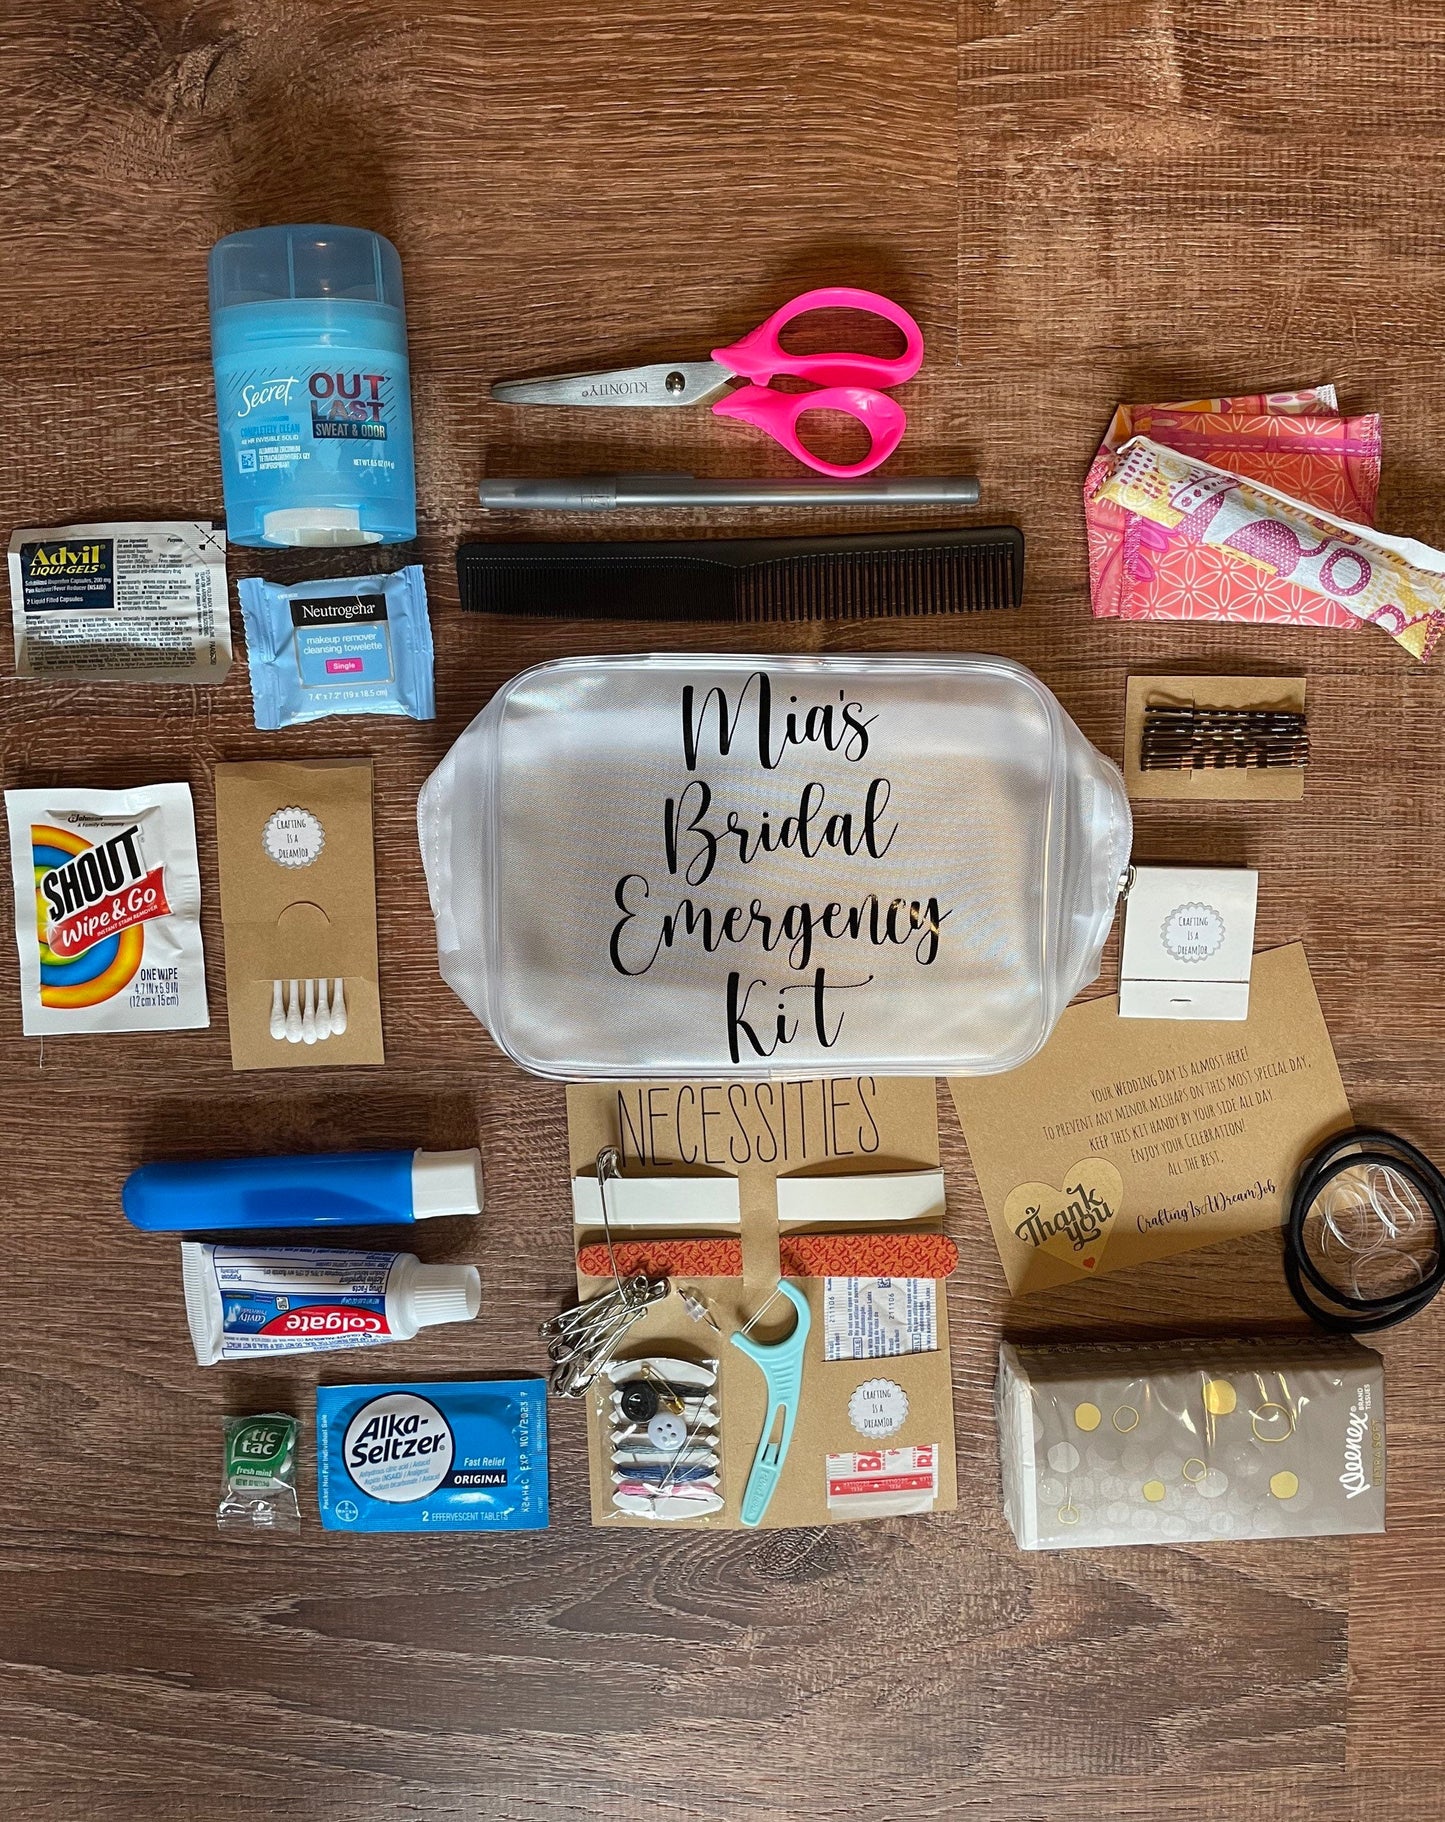 How To Create The Ultimate Wedding Day Emergency Kit  Wedding emergency kit,  Emergency kit, Wedding survival kits